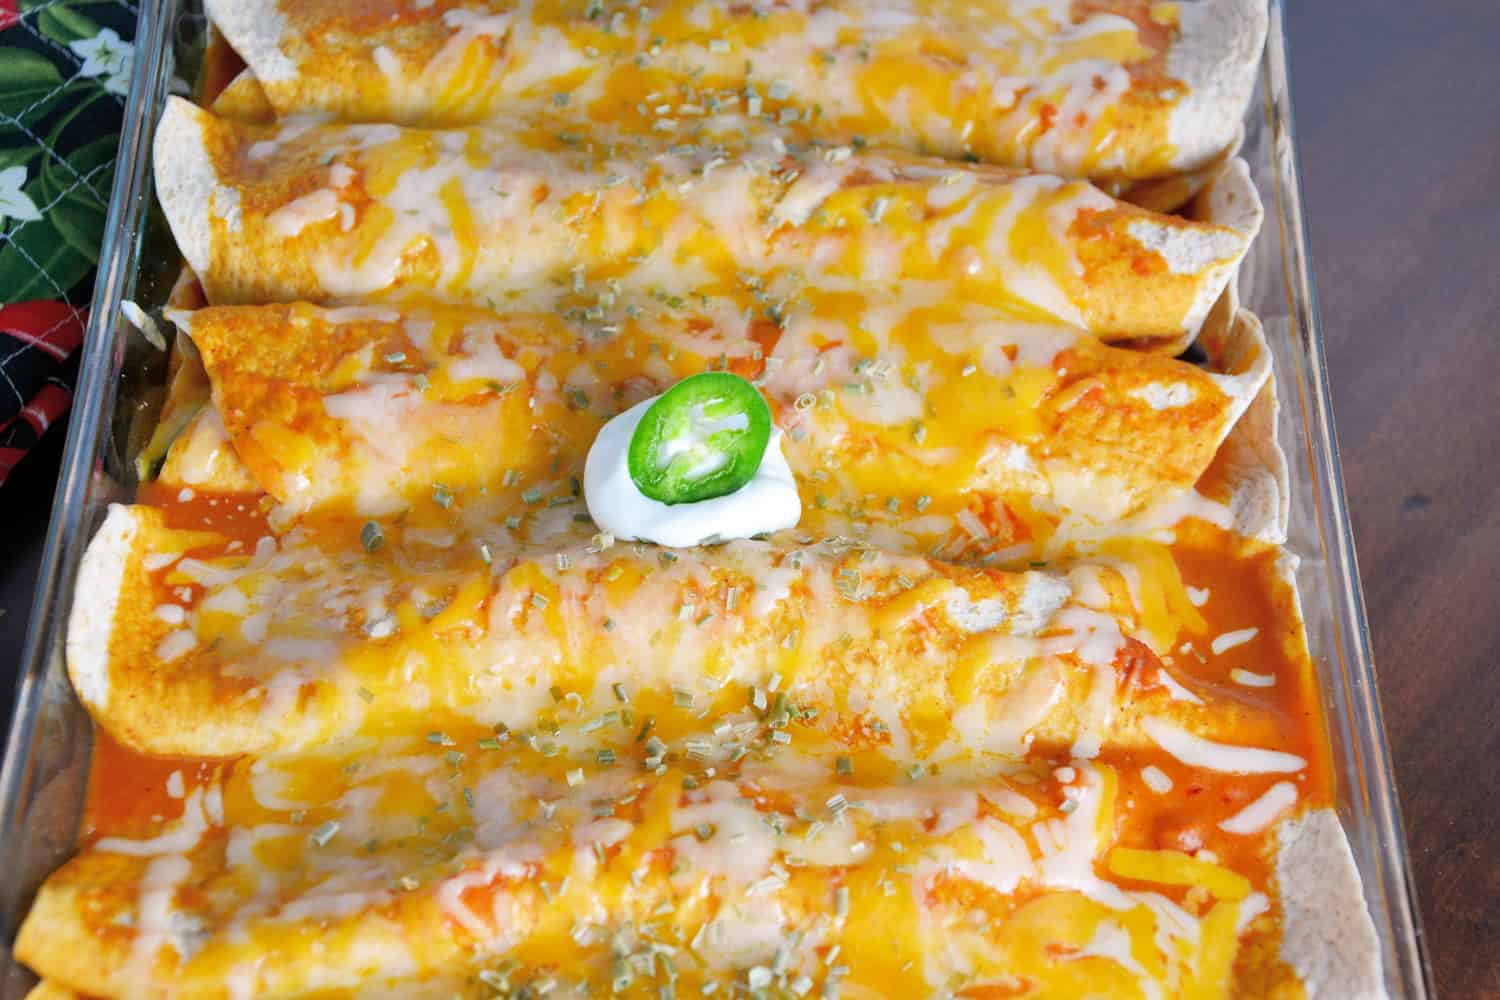 Baked Chicken Enchiladas is a savory, quick recipe that can work on any day of the week. When it come to easy chicken enchiladas, look no further! #easychickenenchiladas #bakedchickenenchiladas #bakedchickenenchiladas www.savoryexperiments.com